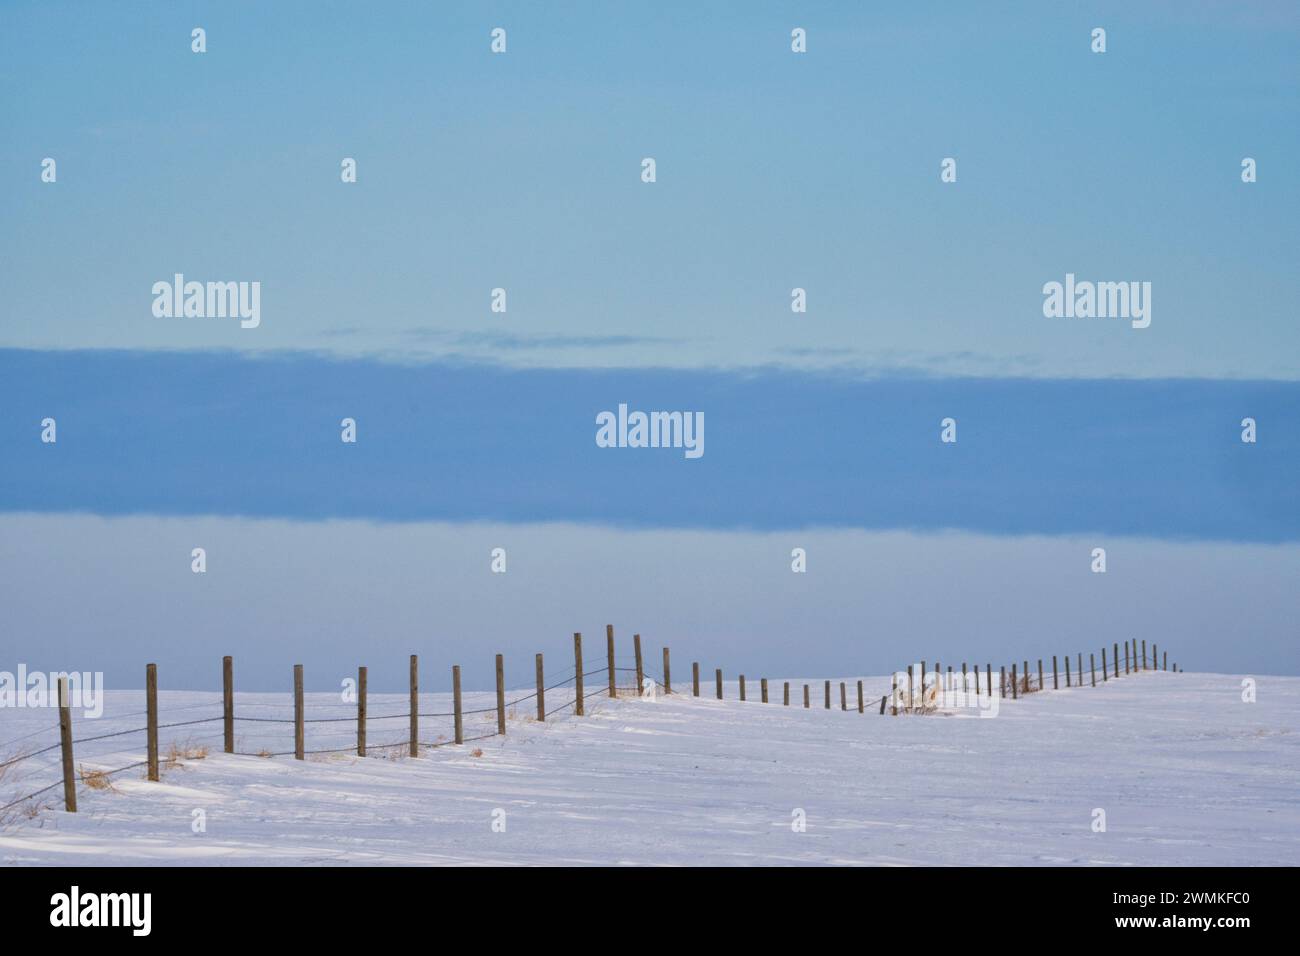 Wintery landscape in rural Saskatchewan with a fence leading off into the distance; Assiniboia, Saskatchewan, Canada Stock Photo